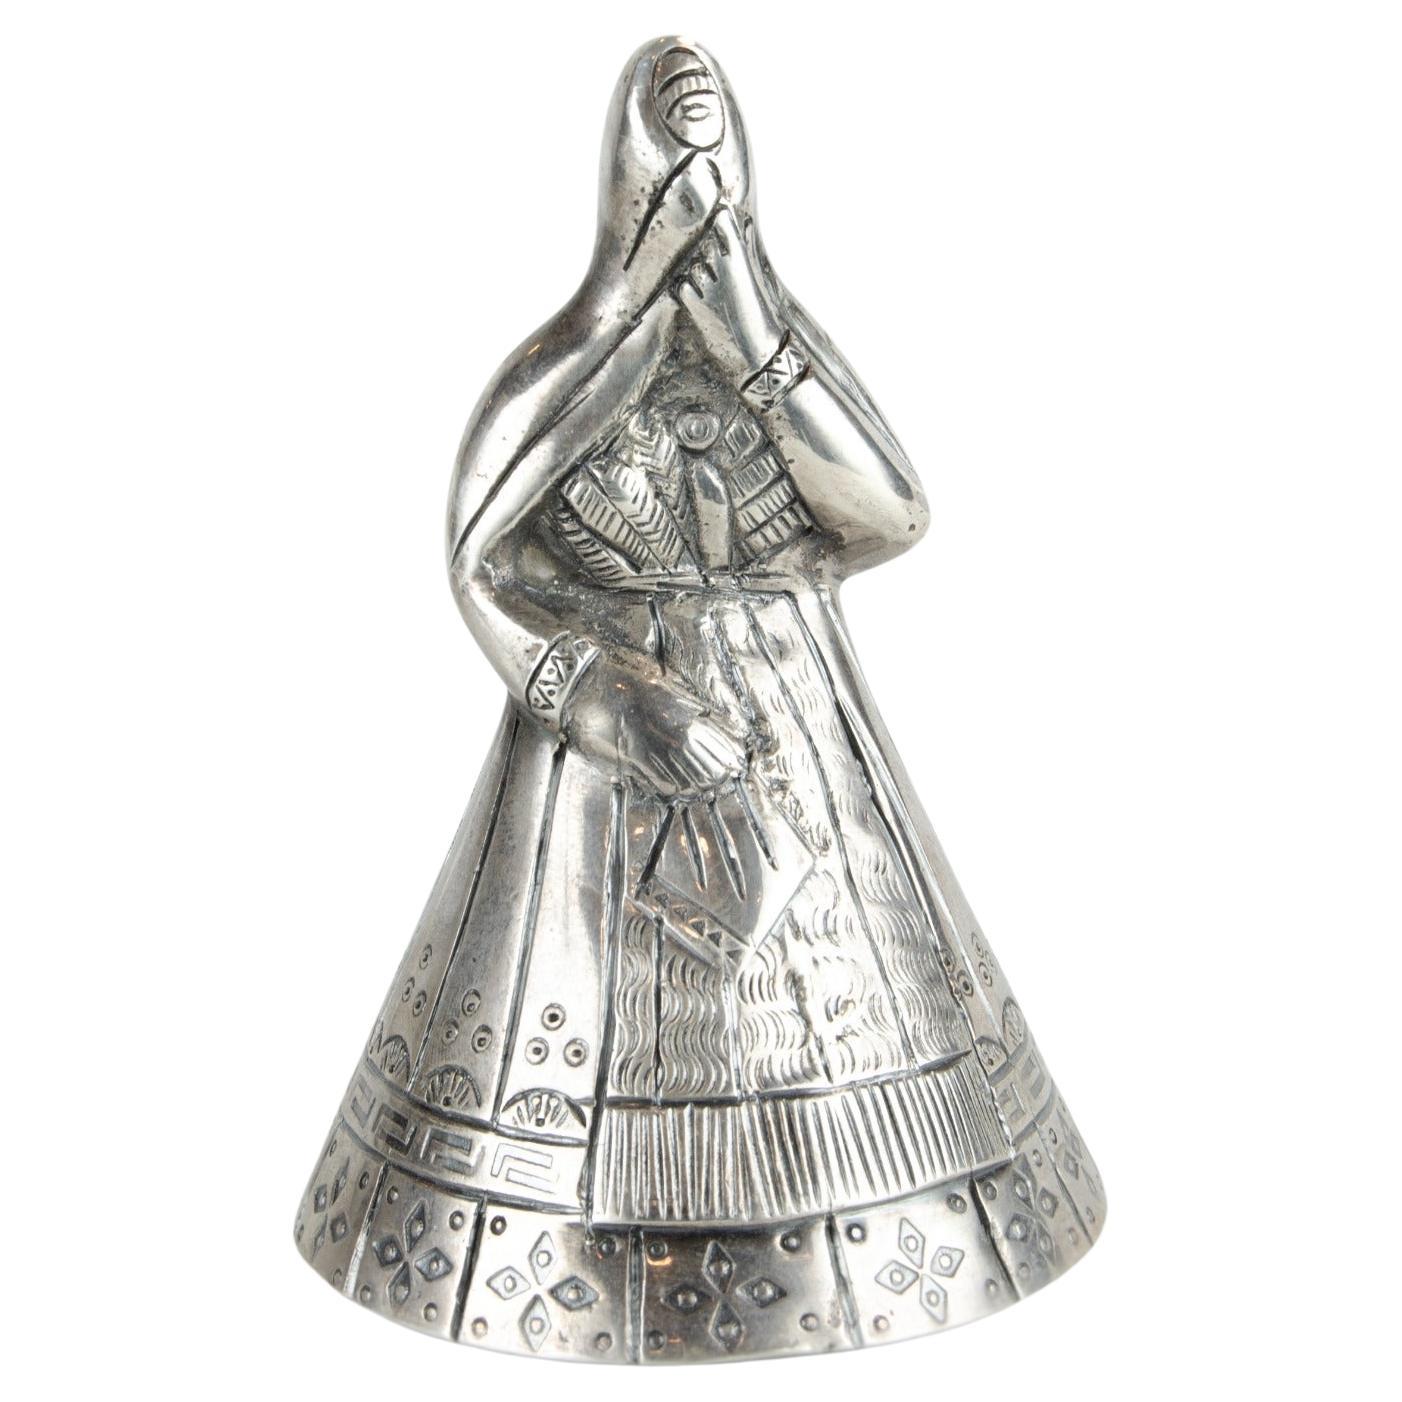 Peruvian Table Bell in 925 Silver from the middle - 20th century